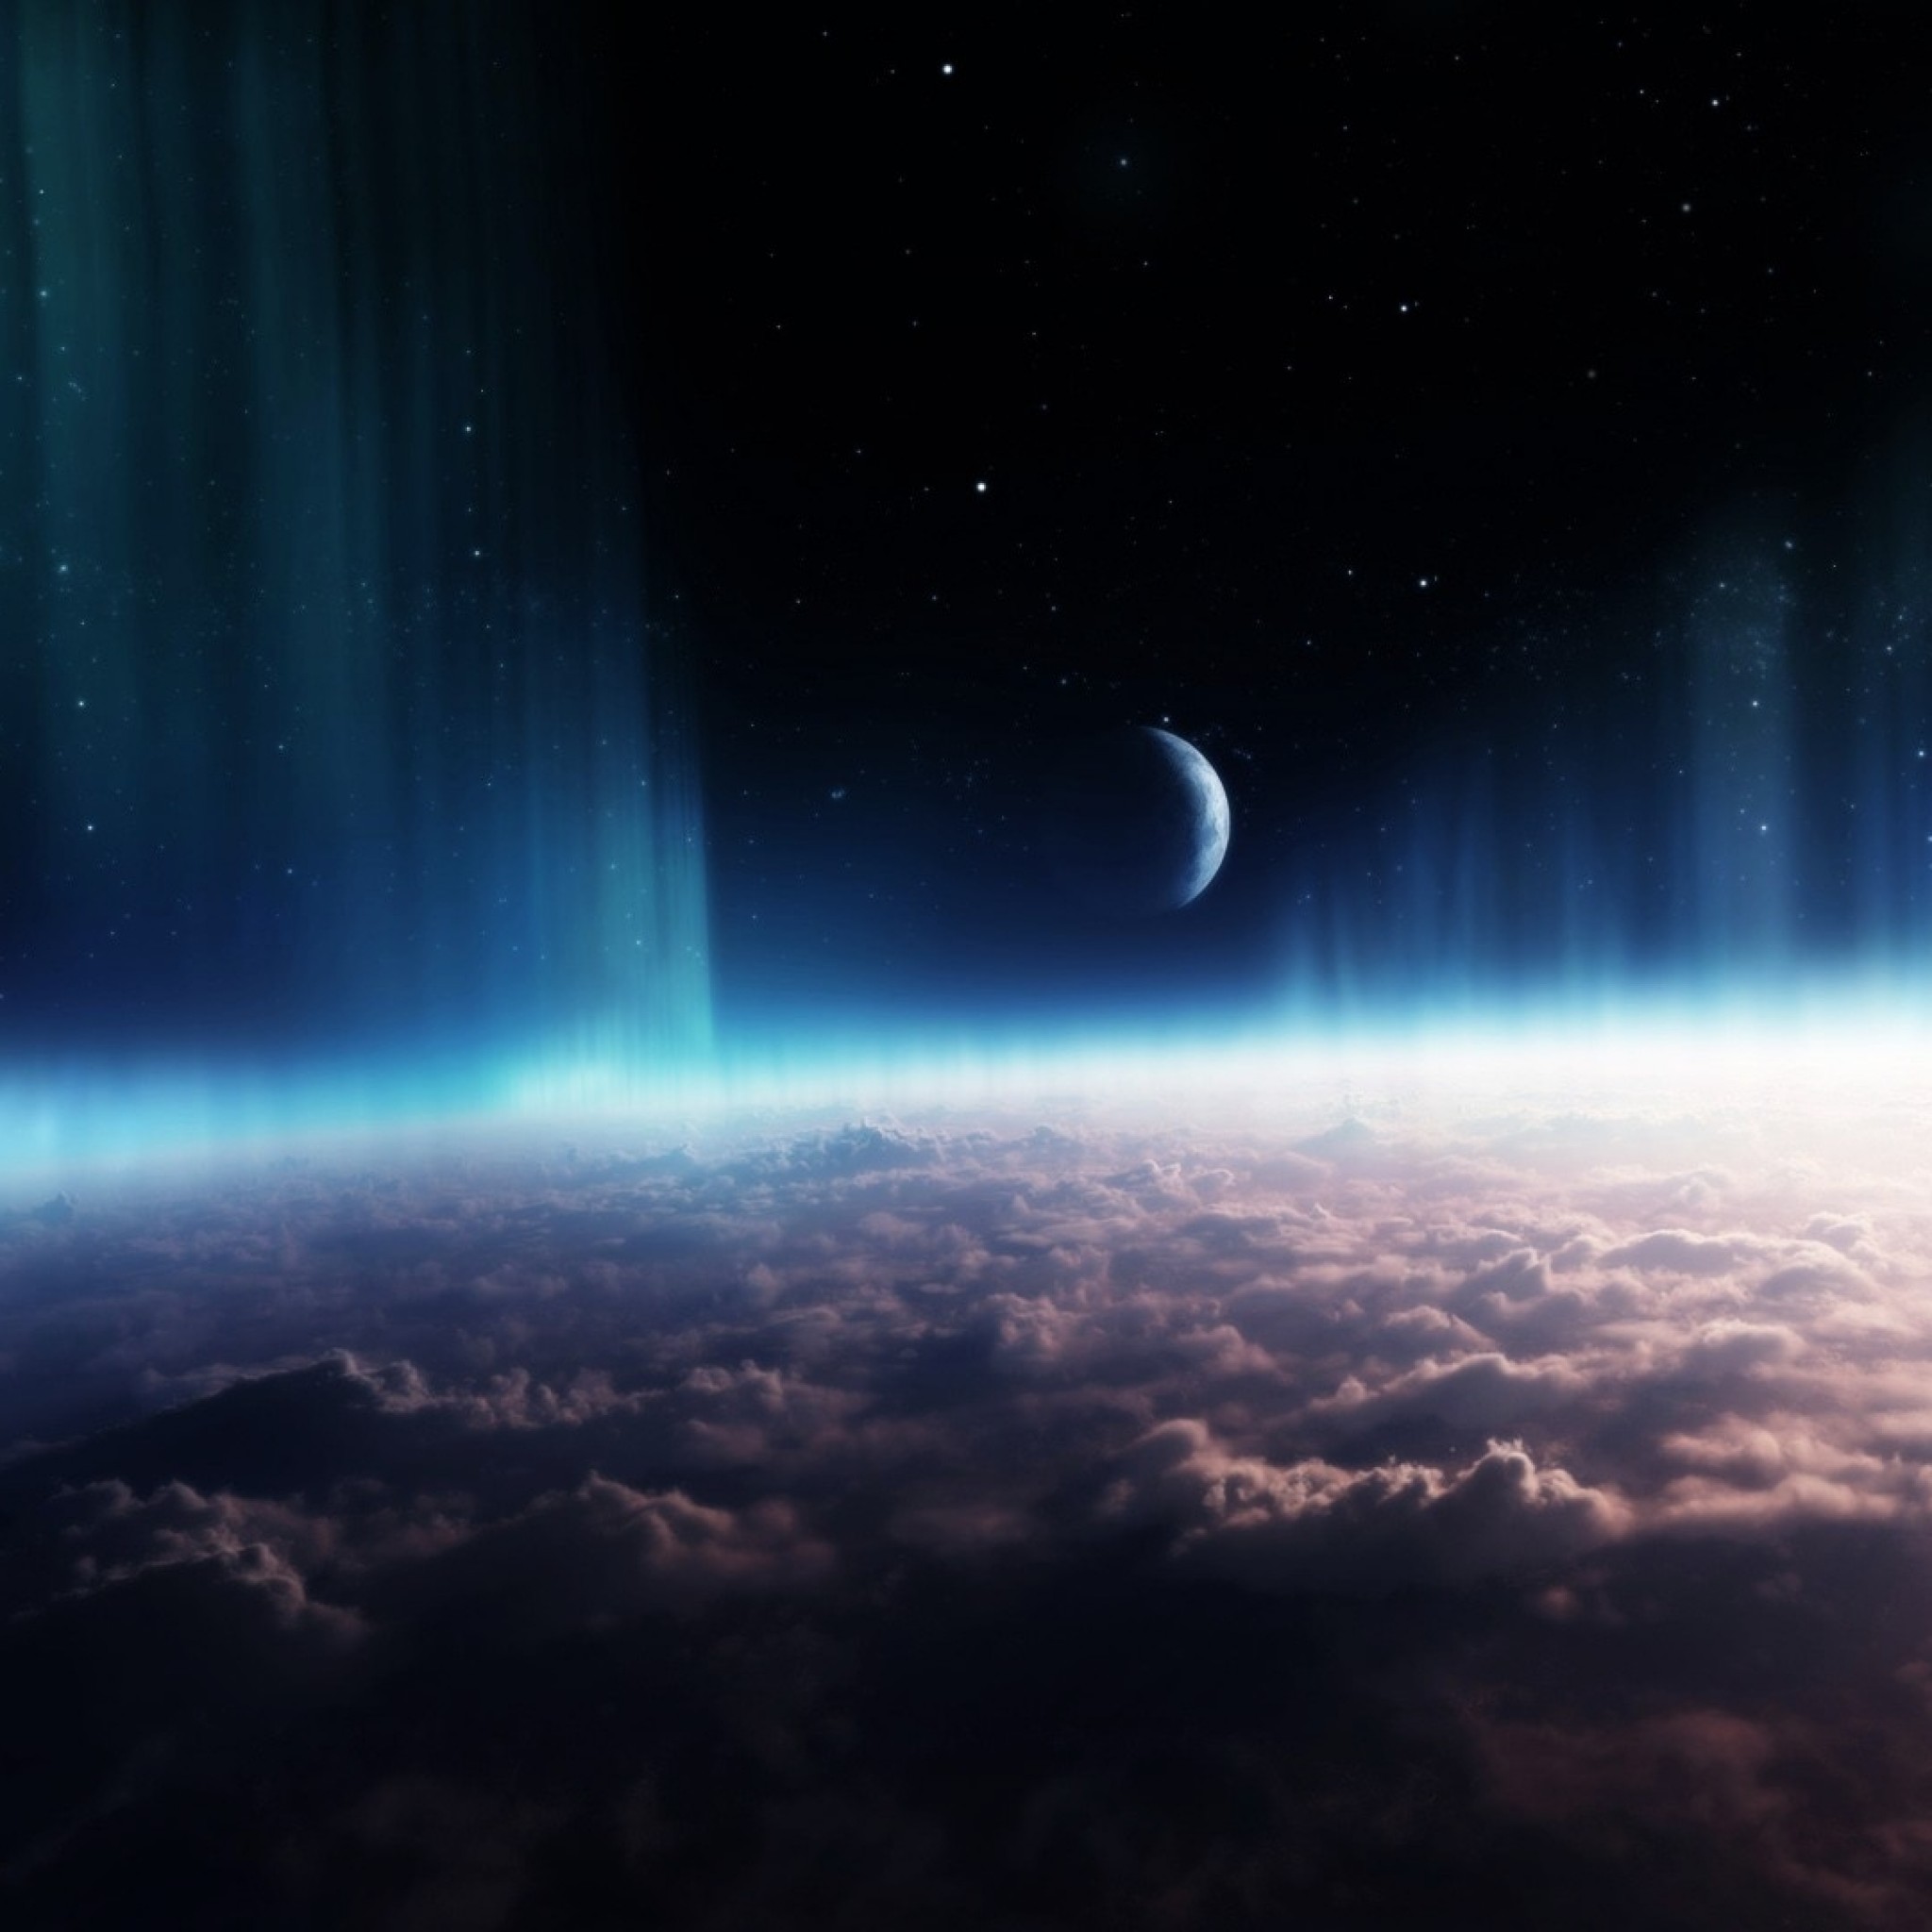 ipad hd wallpapers 1080p,atmosphere,sky,outer space,astronomical object,space